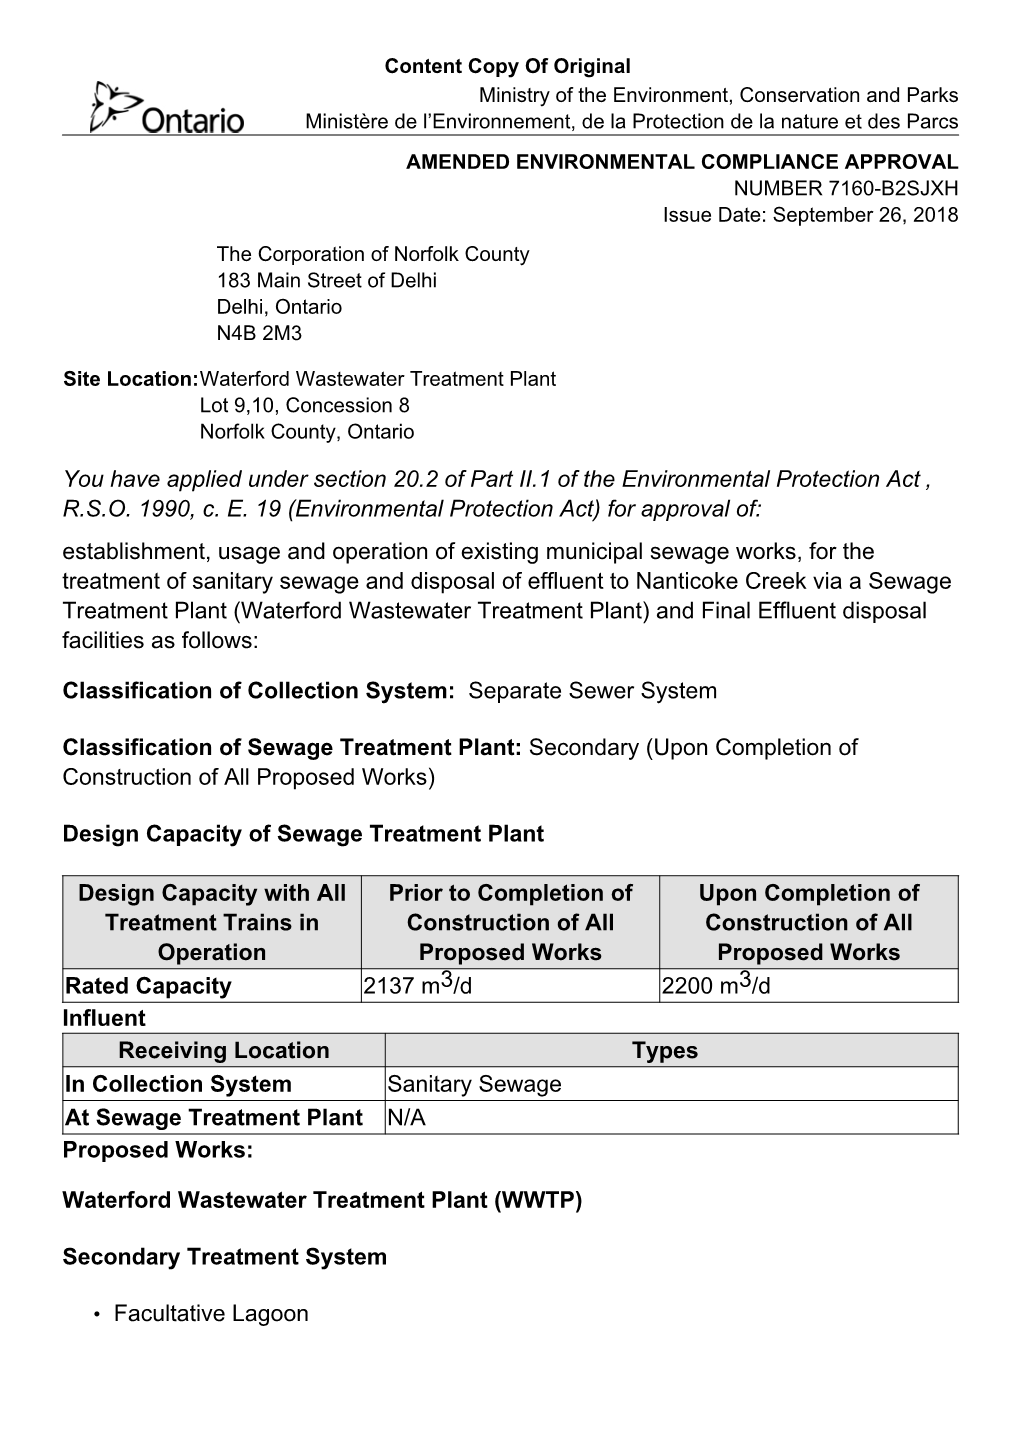 Amended Environmental Compliance Approval 7160